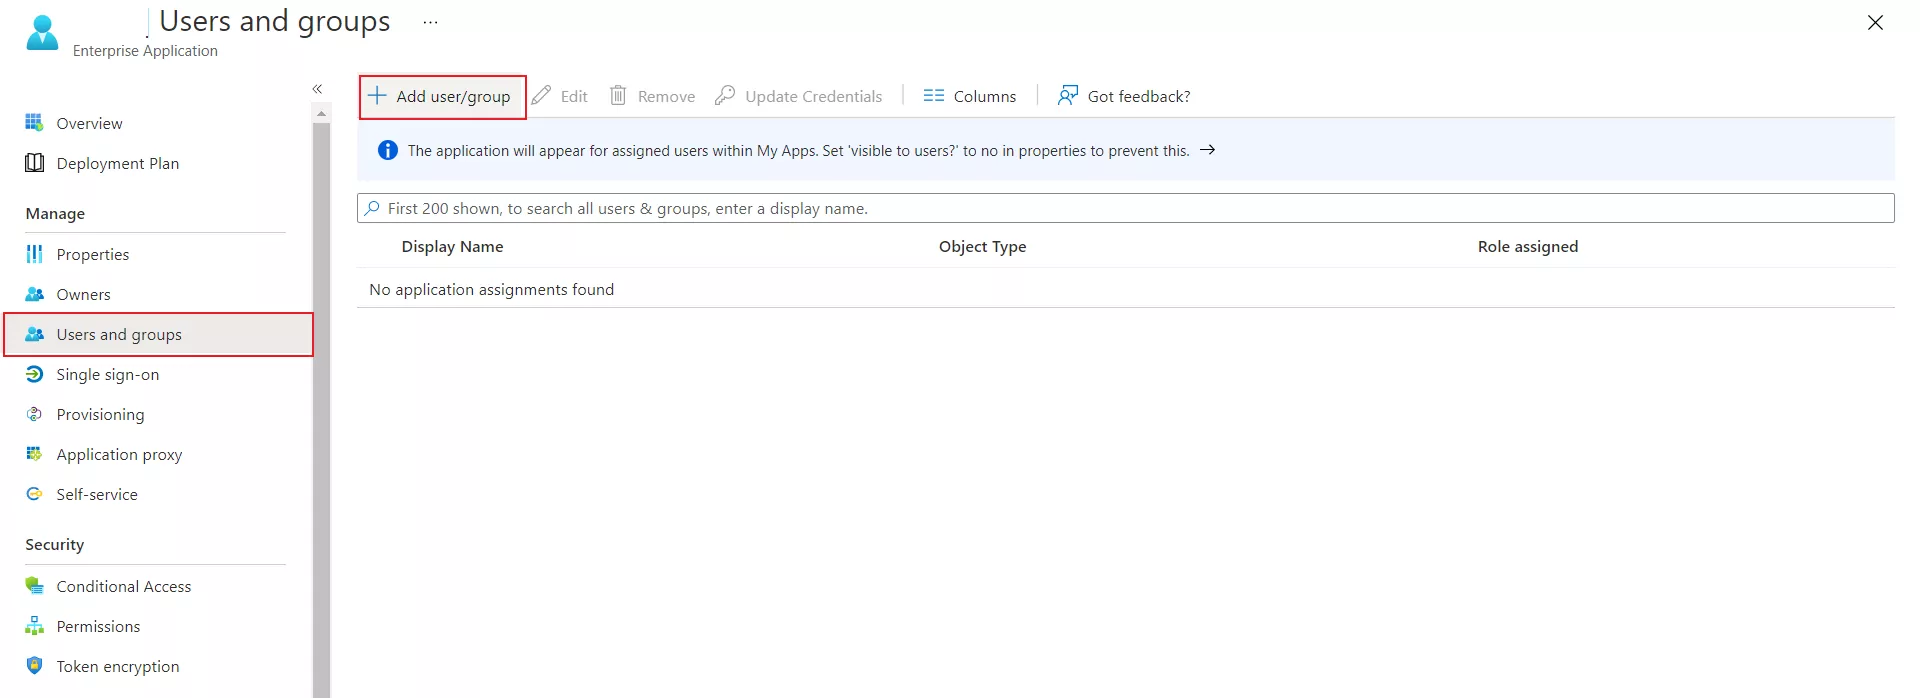 Oracle EBS Azure AD Single Sign-On: Assign groups and users